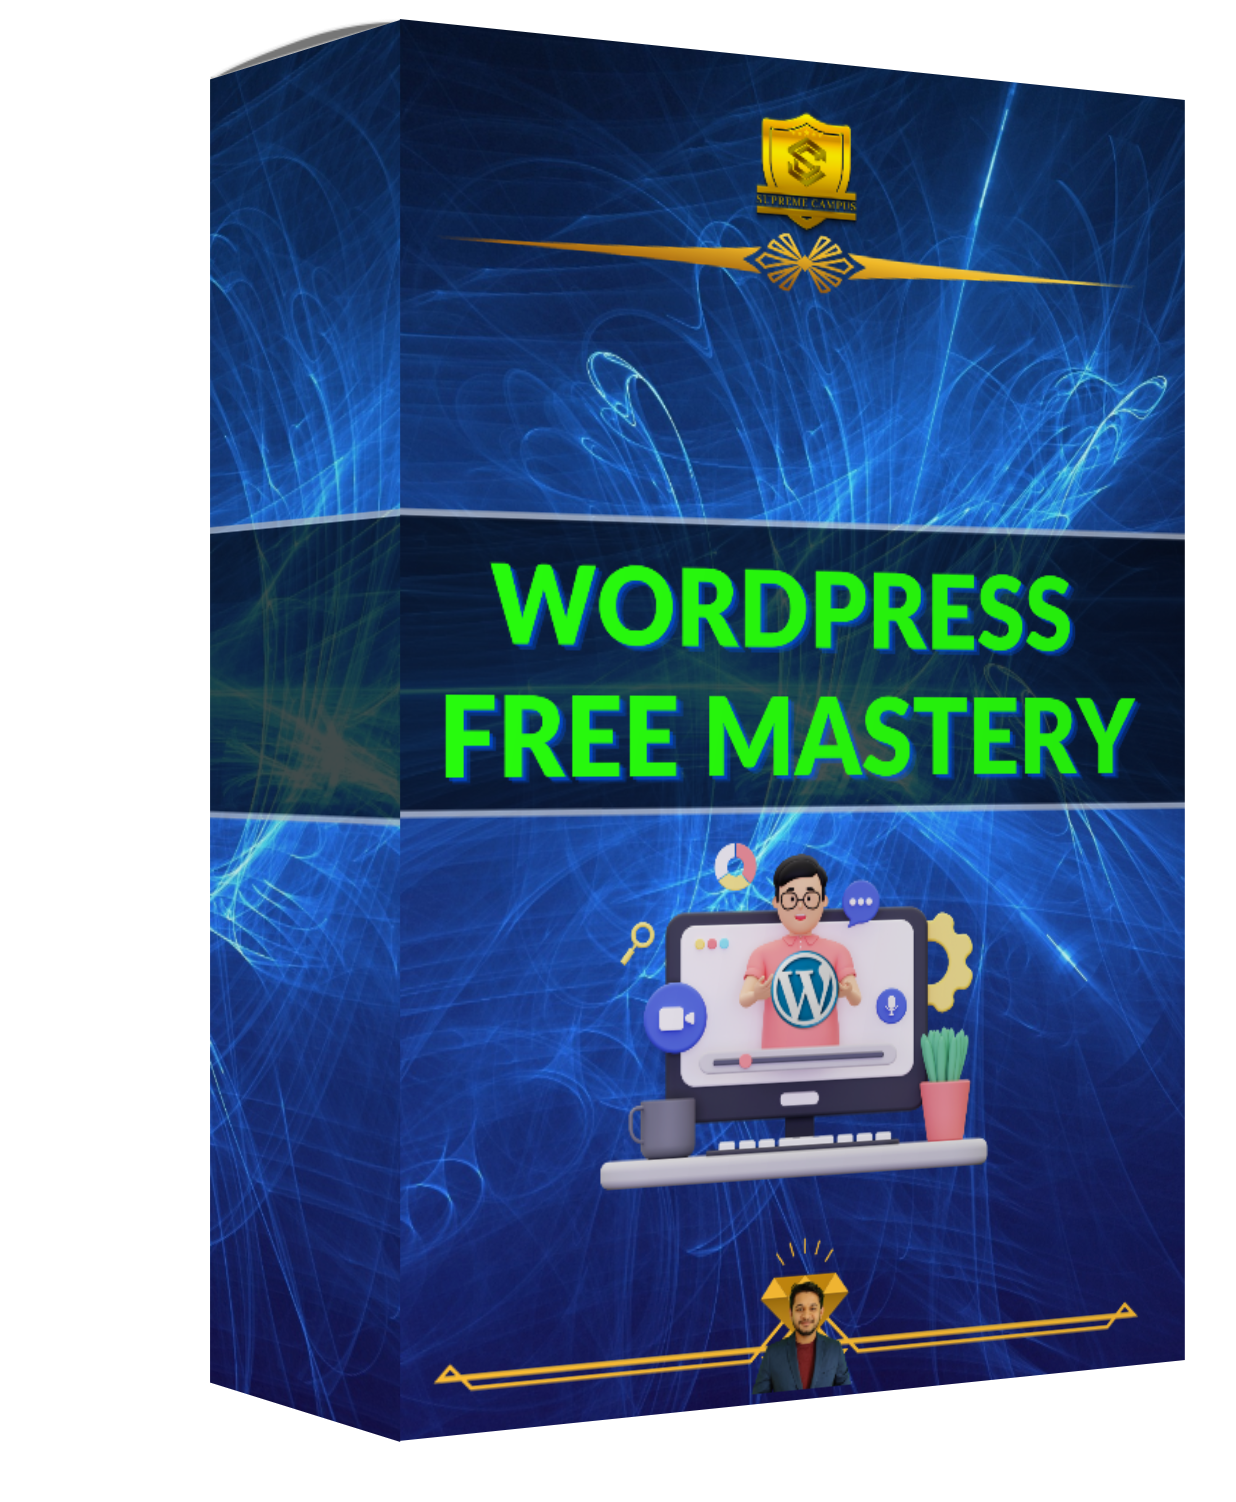 Wordpress Free mastery course by supremecampus